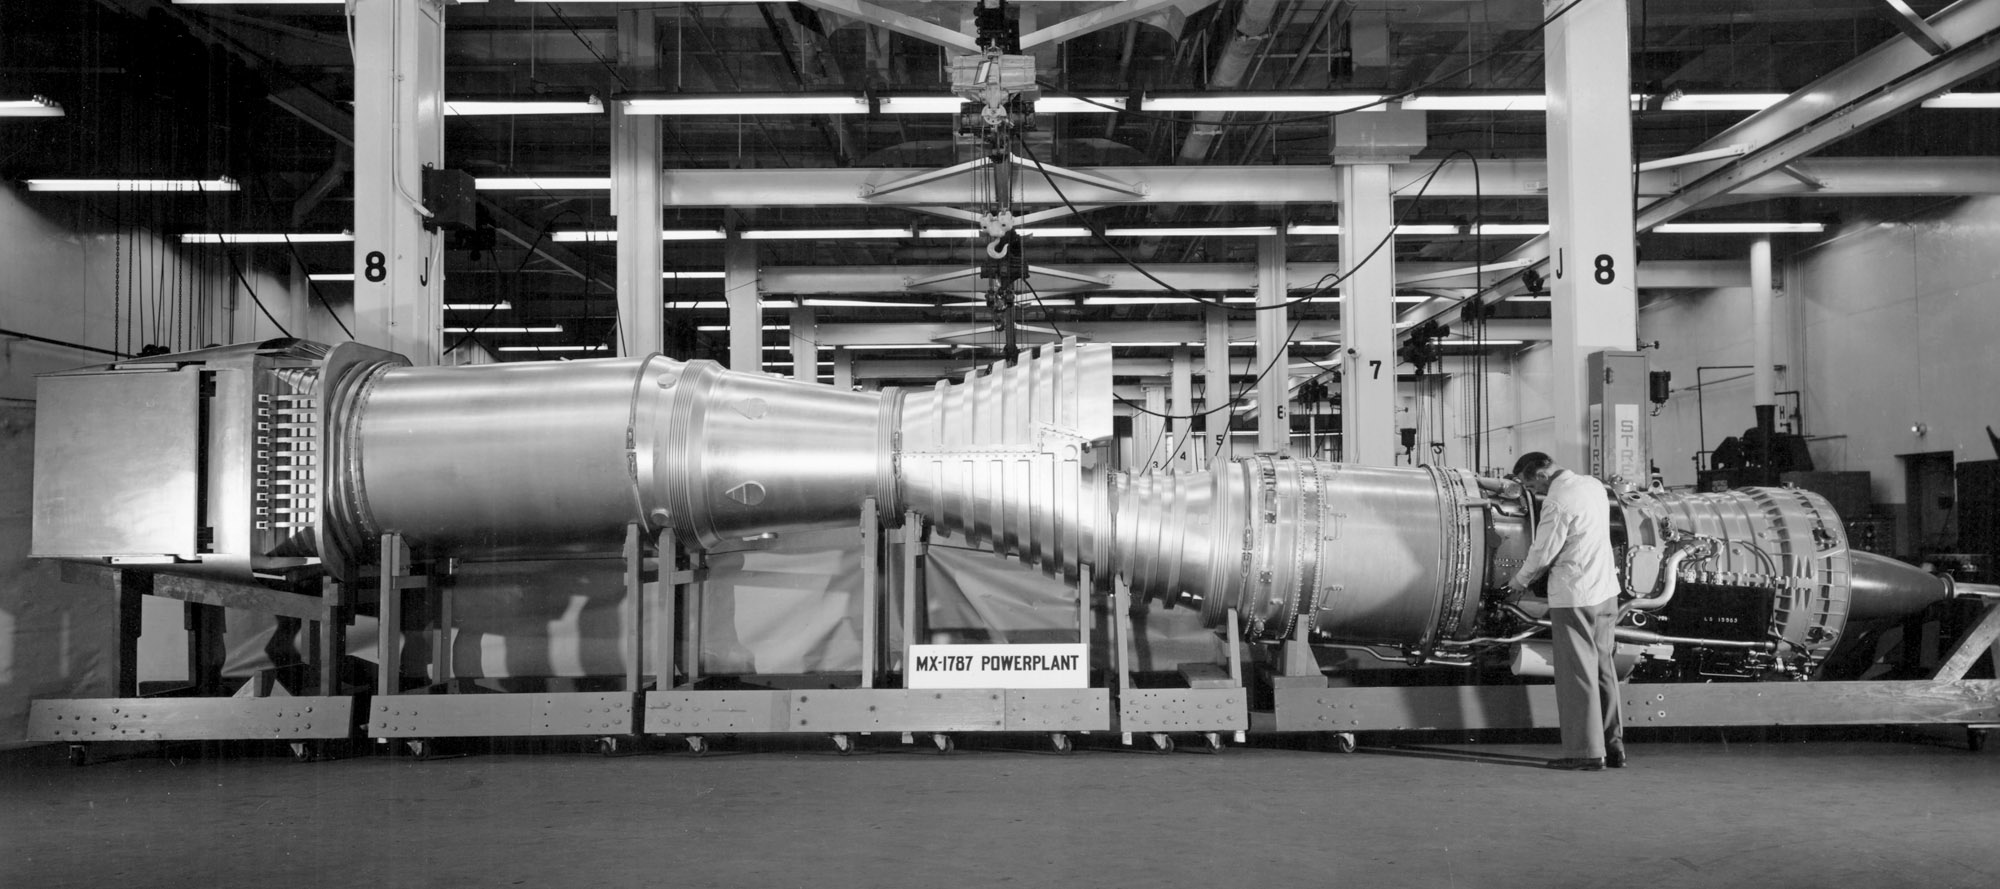 Full scale mockup of the Wright Aeronautical XJ67 and XRJ55 dual-cycle propulsion system developed for the Republic F-103. (National Archives, St. Louis)